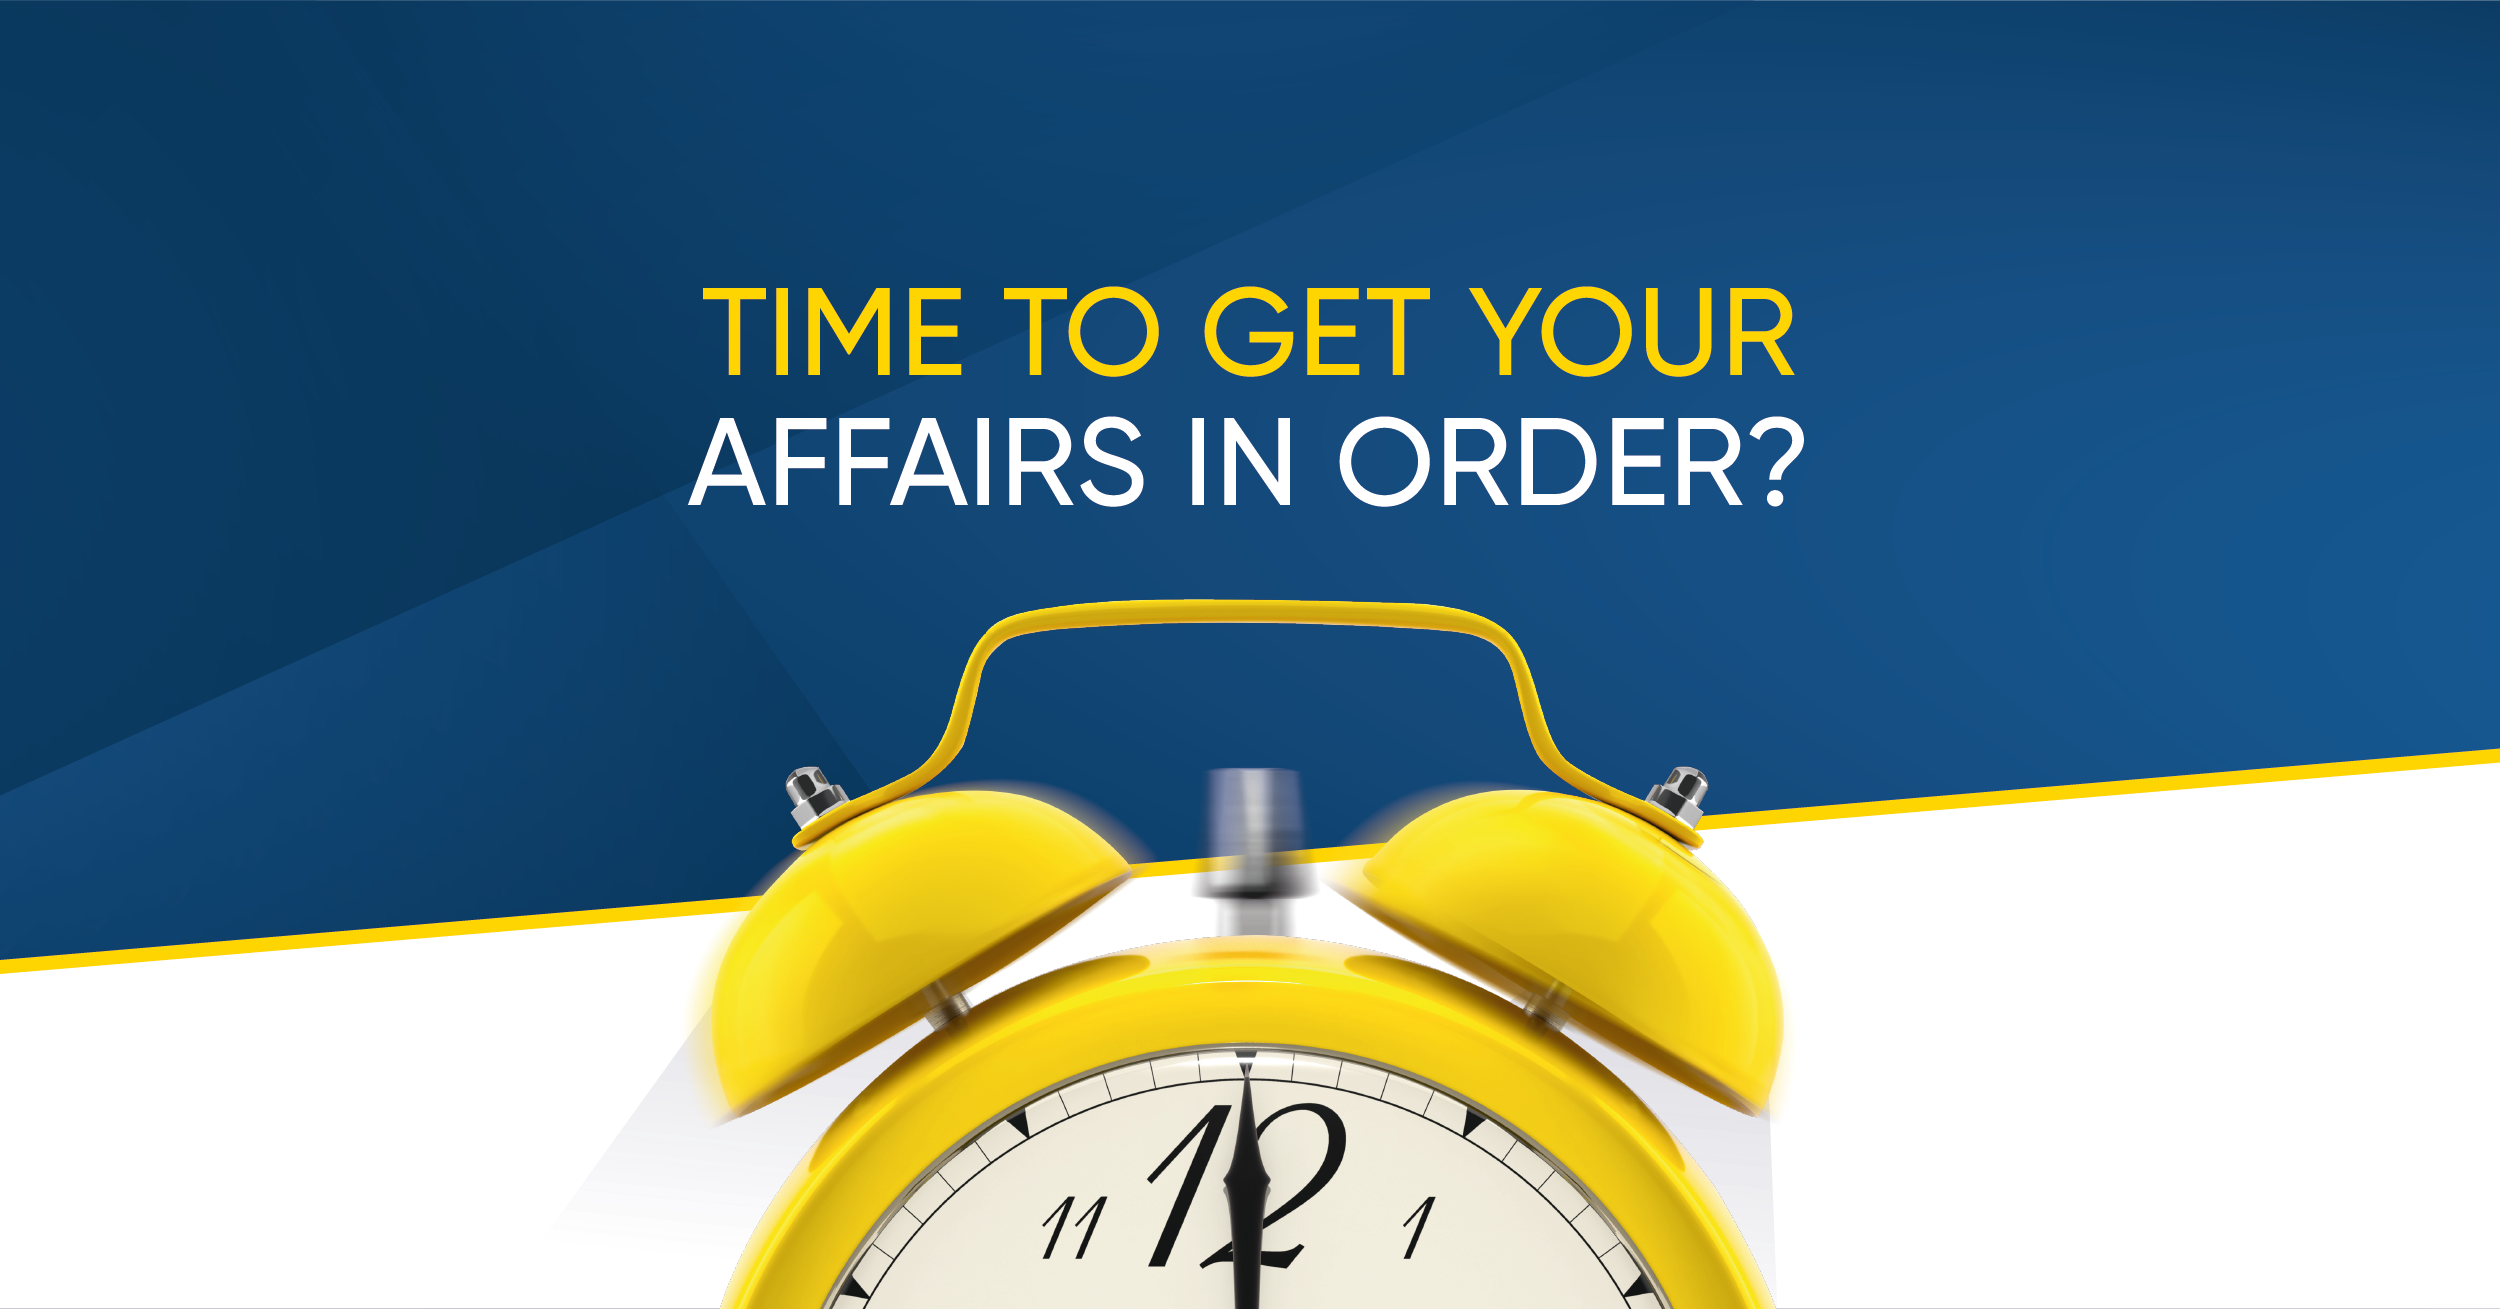 Time to get your affairs in order? Alarm clock